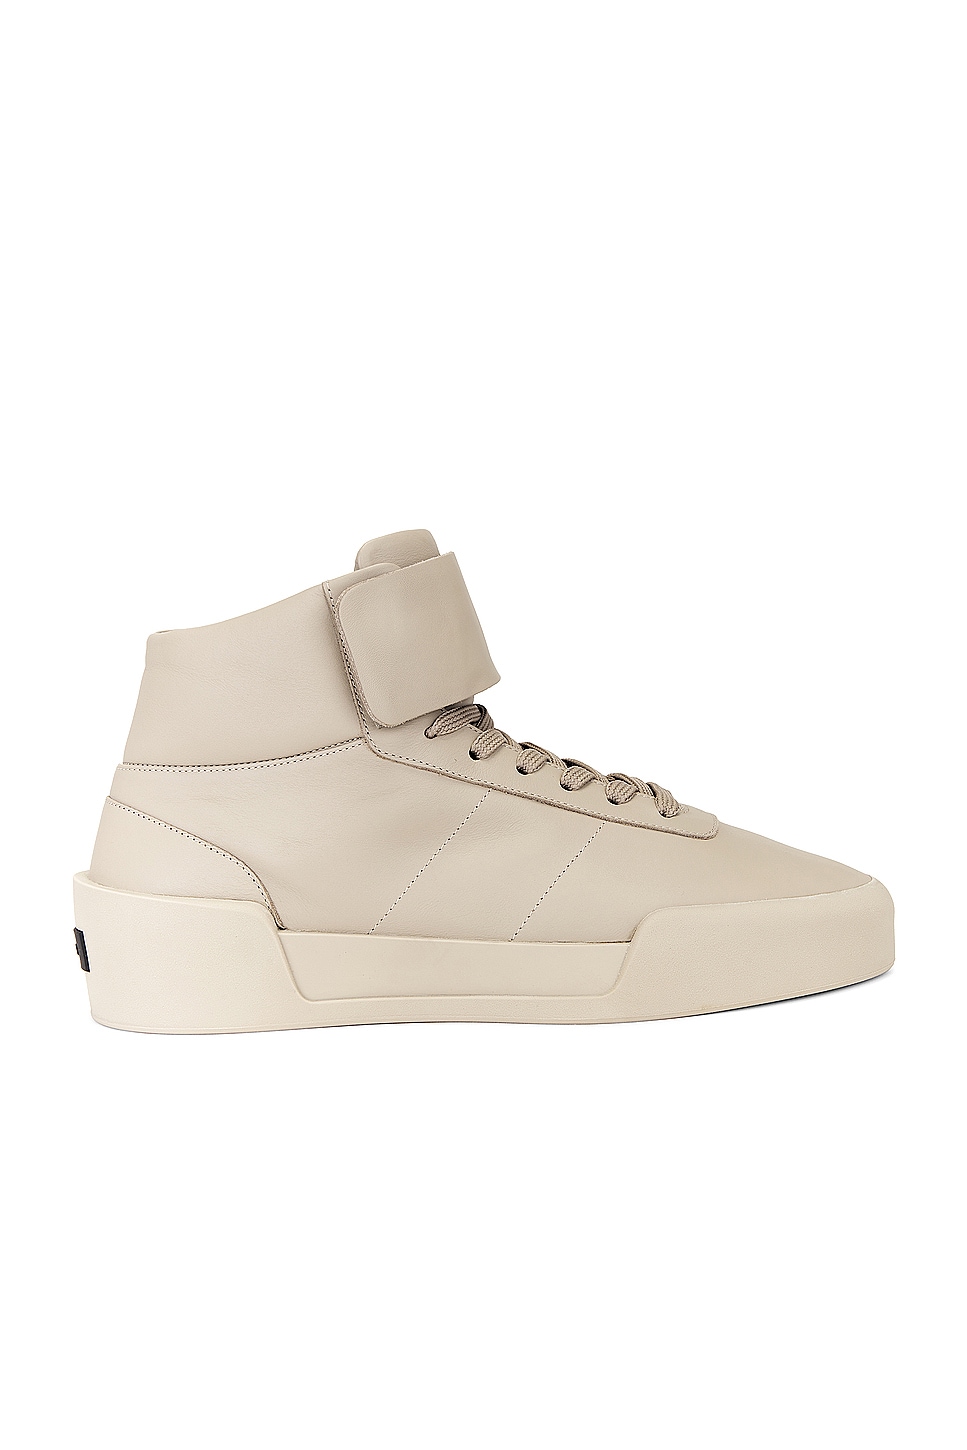 Image 1 of Fear of God Aerobic High in Taupe